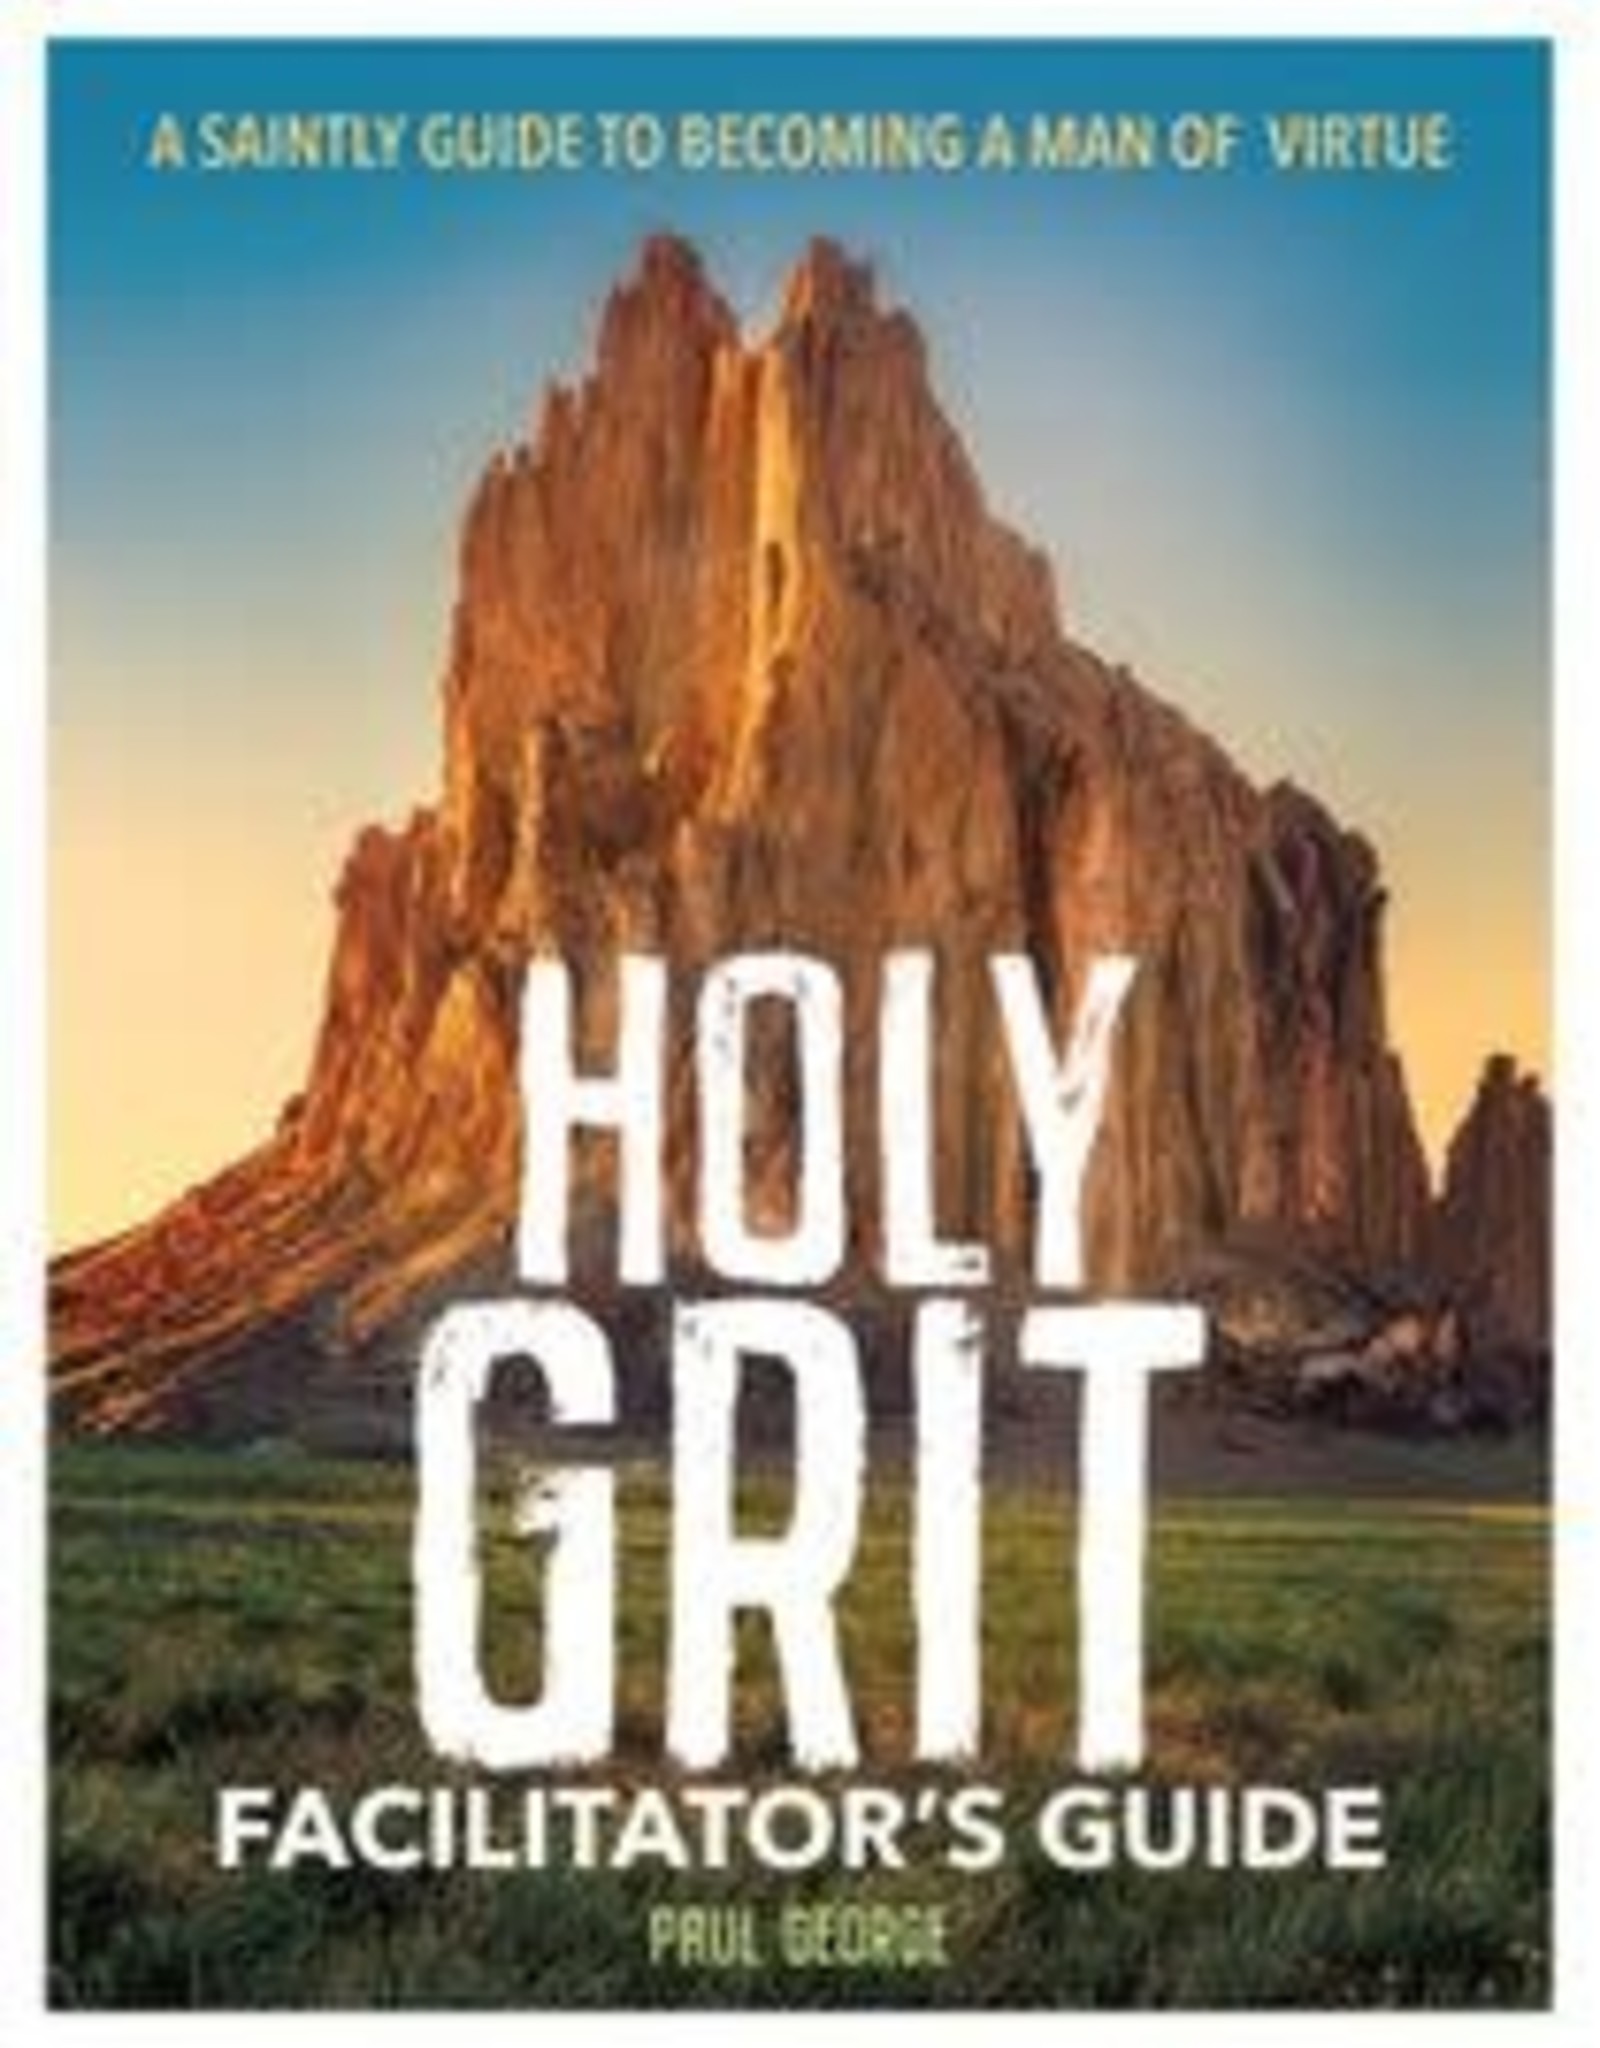 Holy Grit:  A Saintly Guide to Becoming A Man of Virture, by Paul George (paperback)